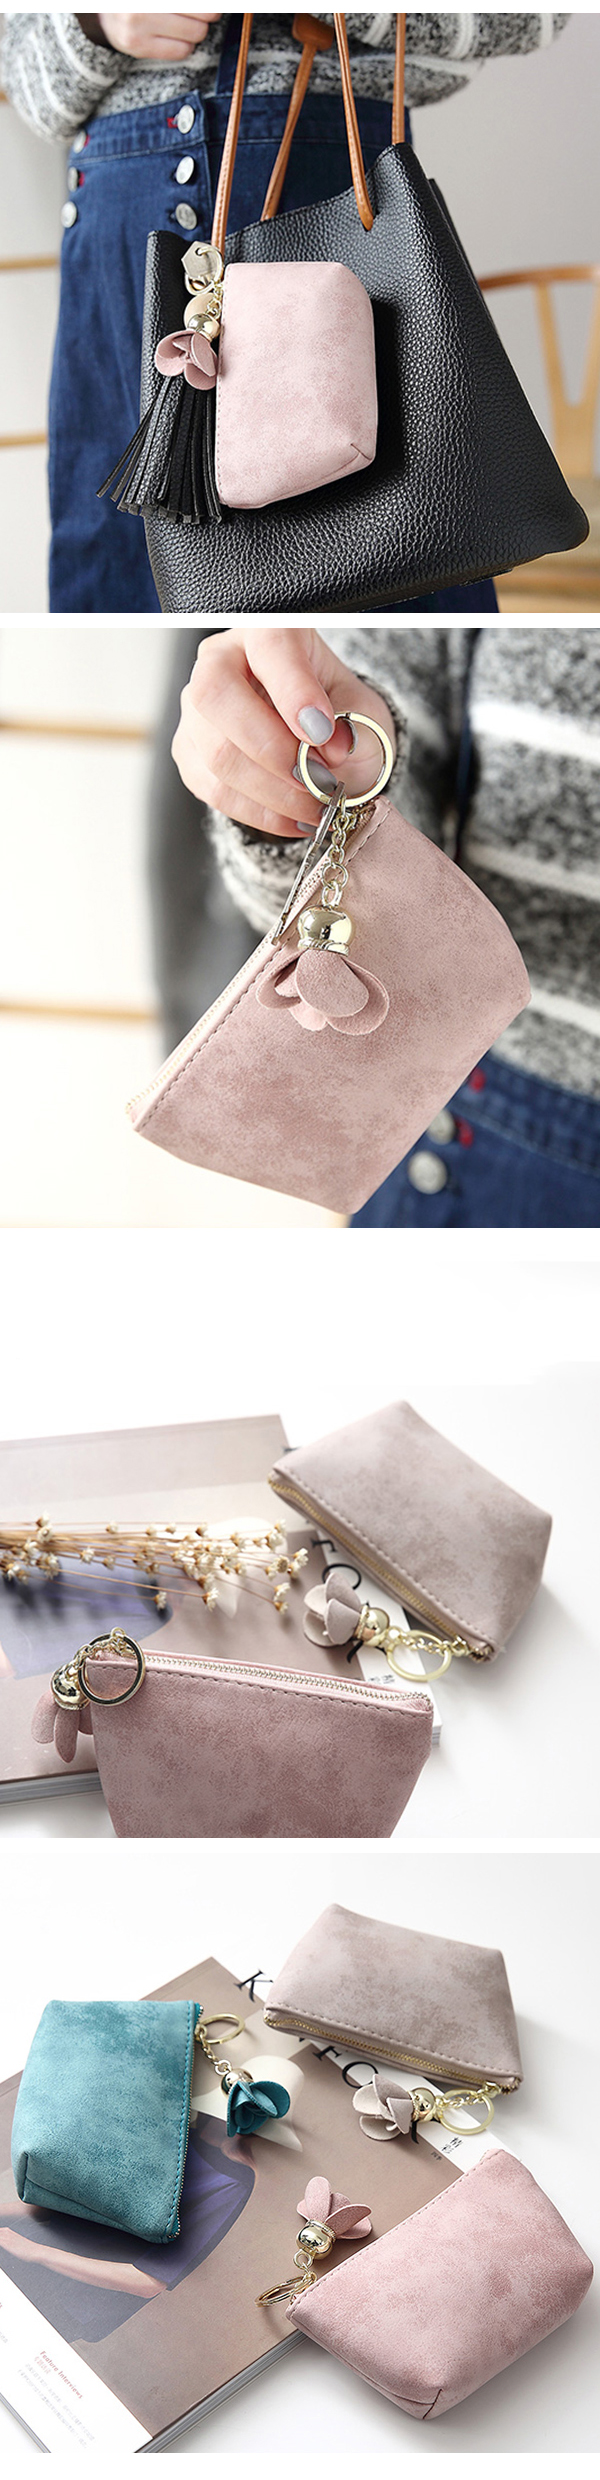 Simple-Frosted-Clutch-Bag-Coin-Bag-Card-Bag-Fresh-Purse-For-Ladies-1267600